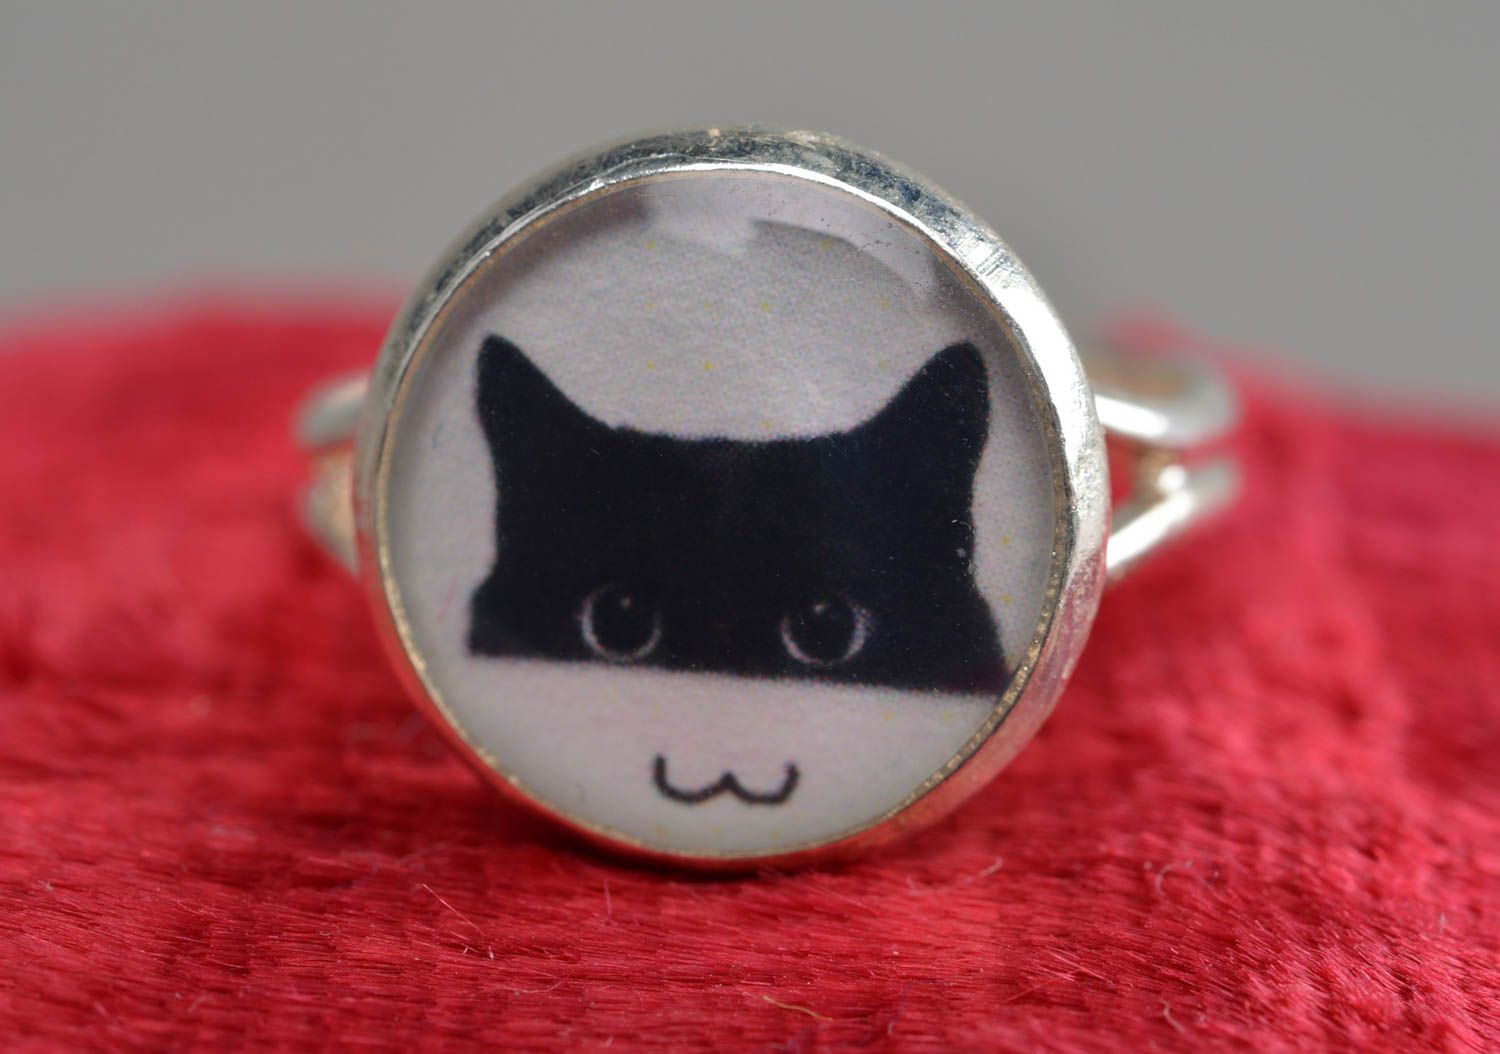 Handmade black and white round top decoupage ring with cat image in jewelry resin photo 2